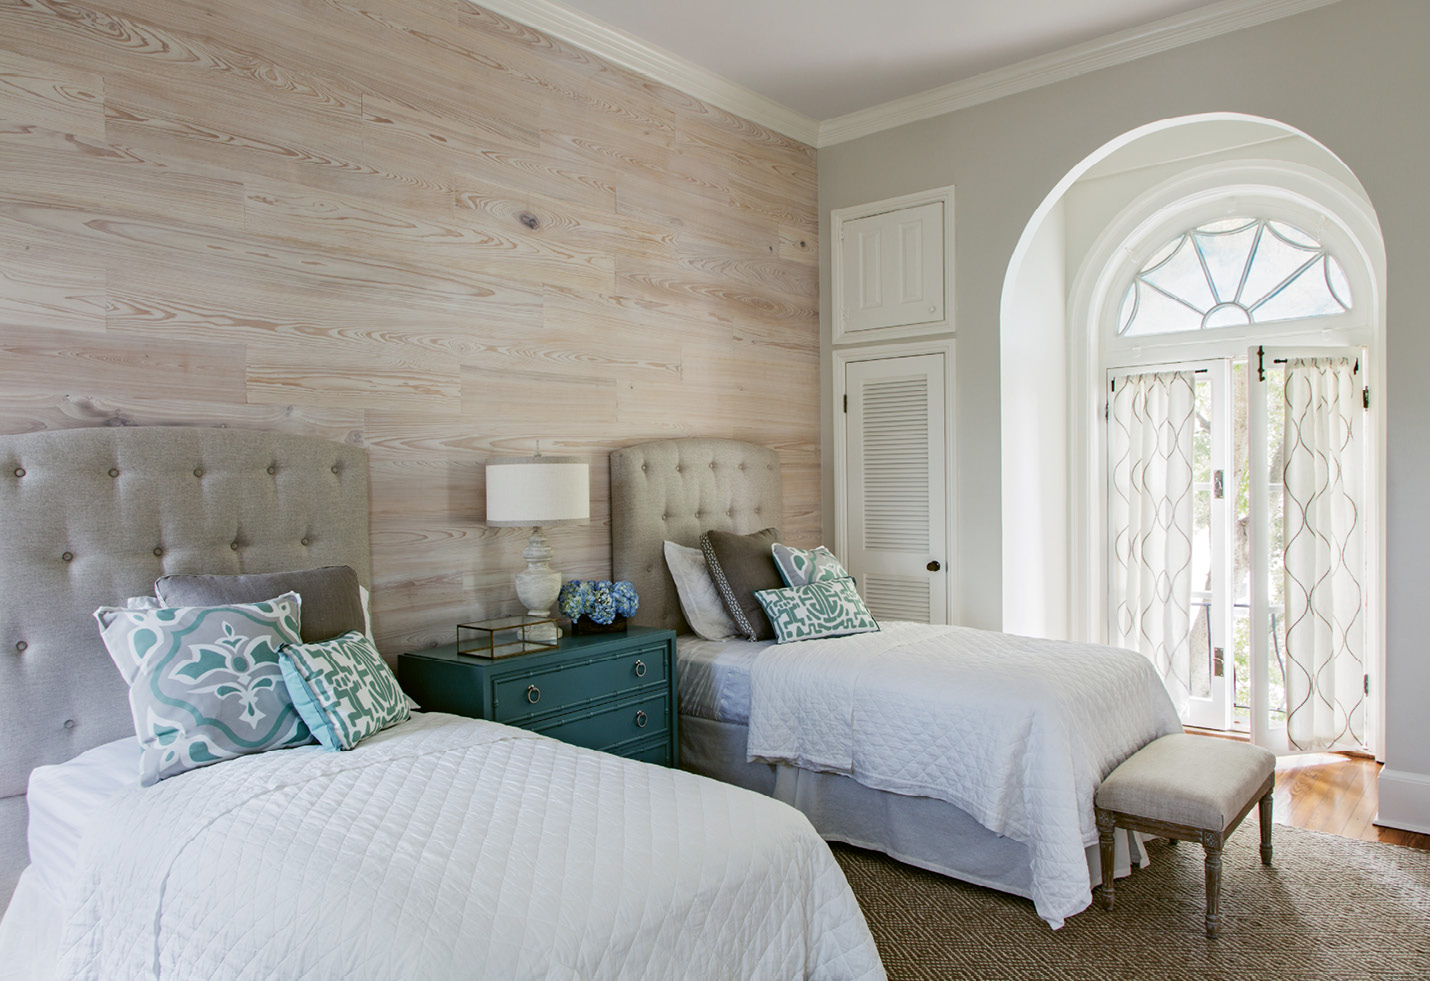 The guest bedroom features an accent wall of whitewashed cypress.